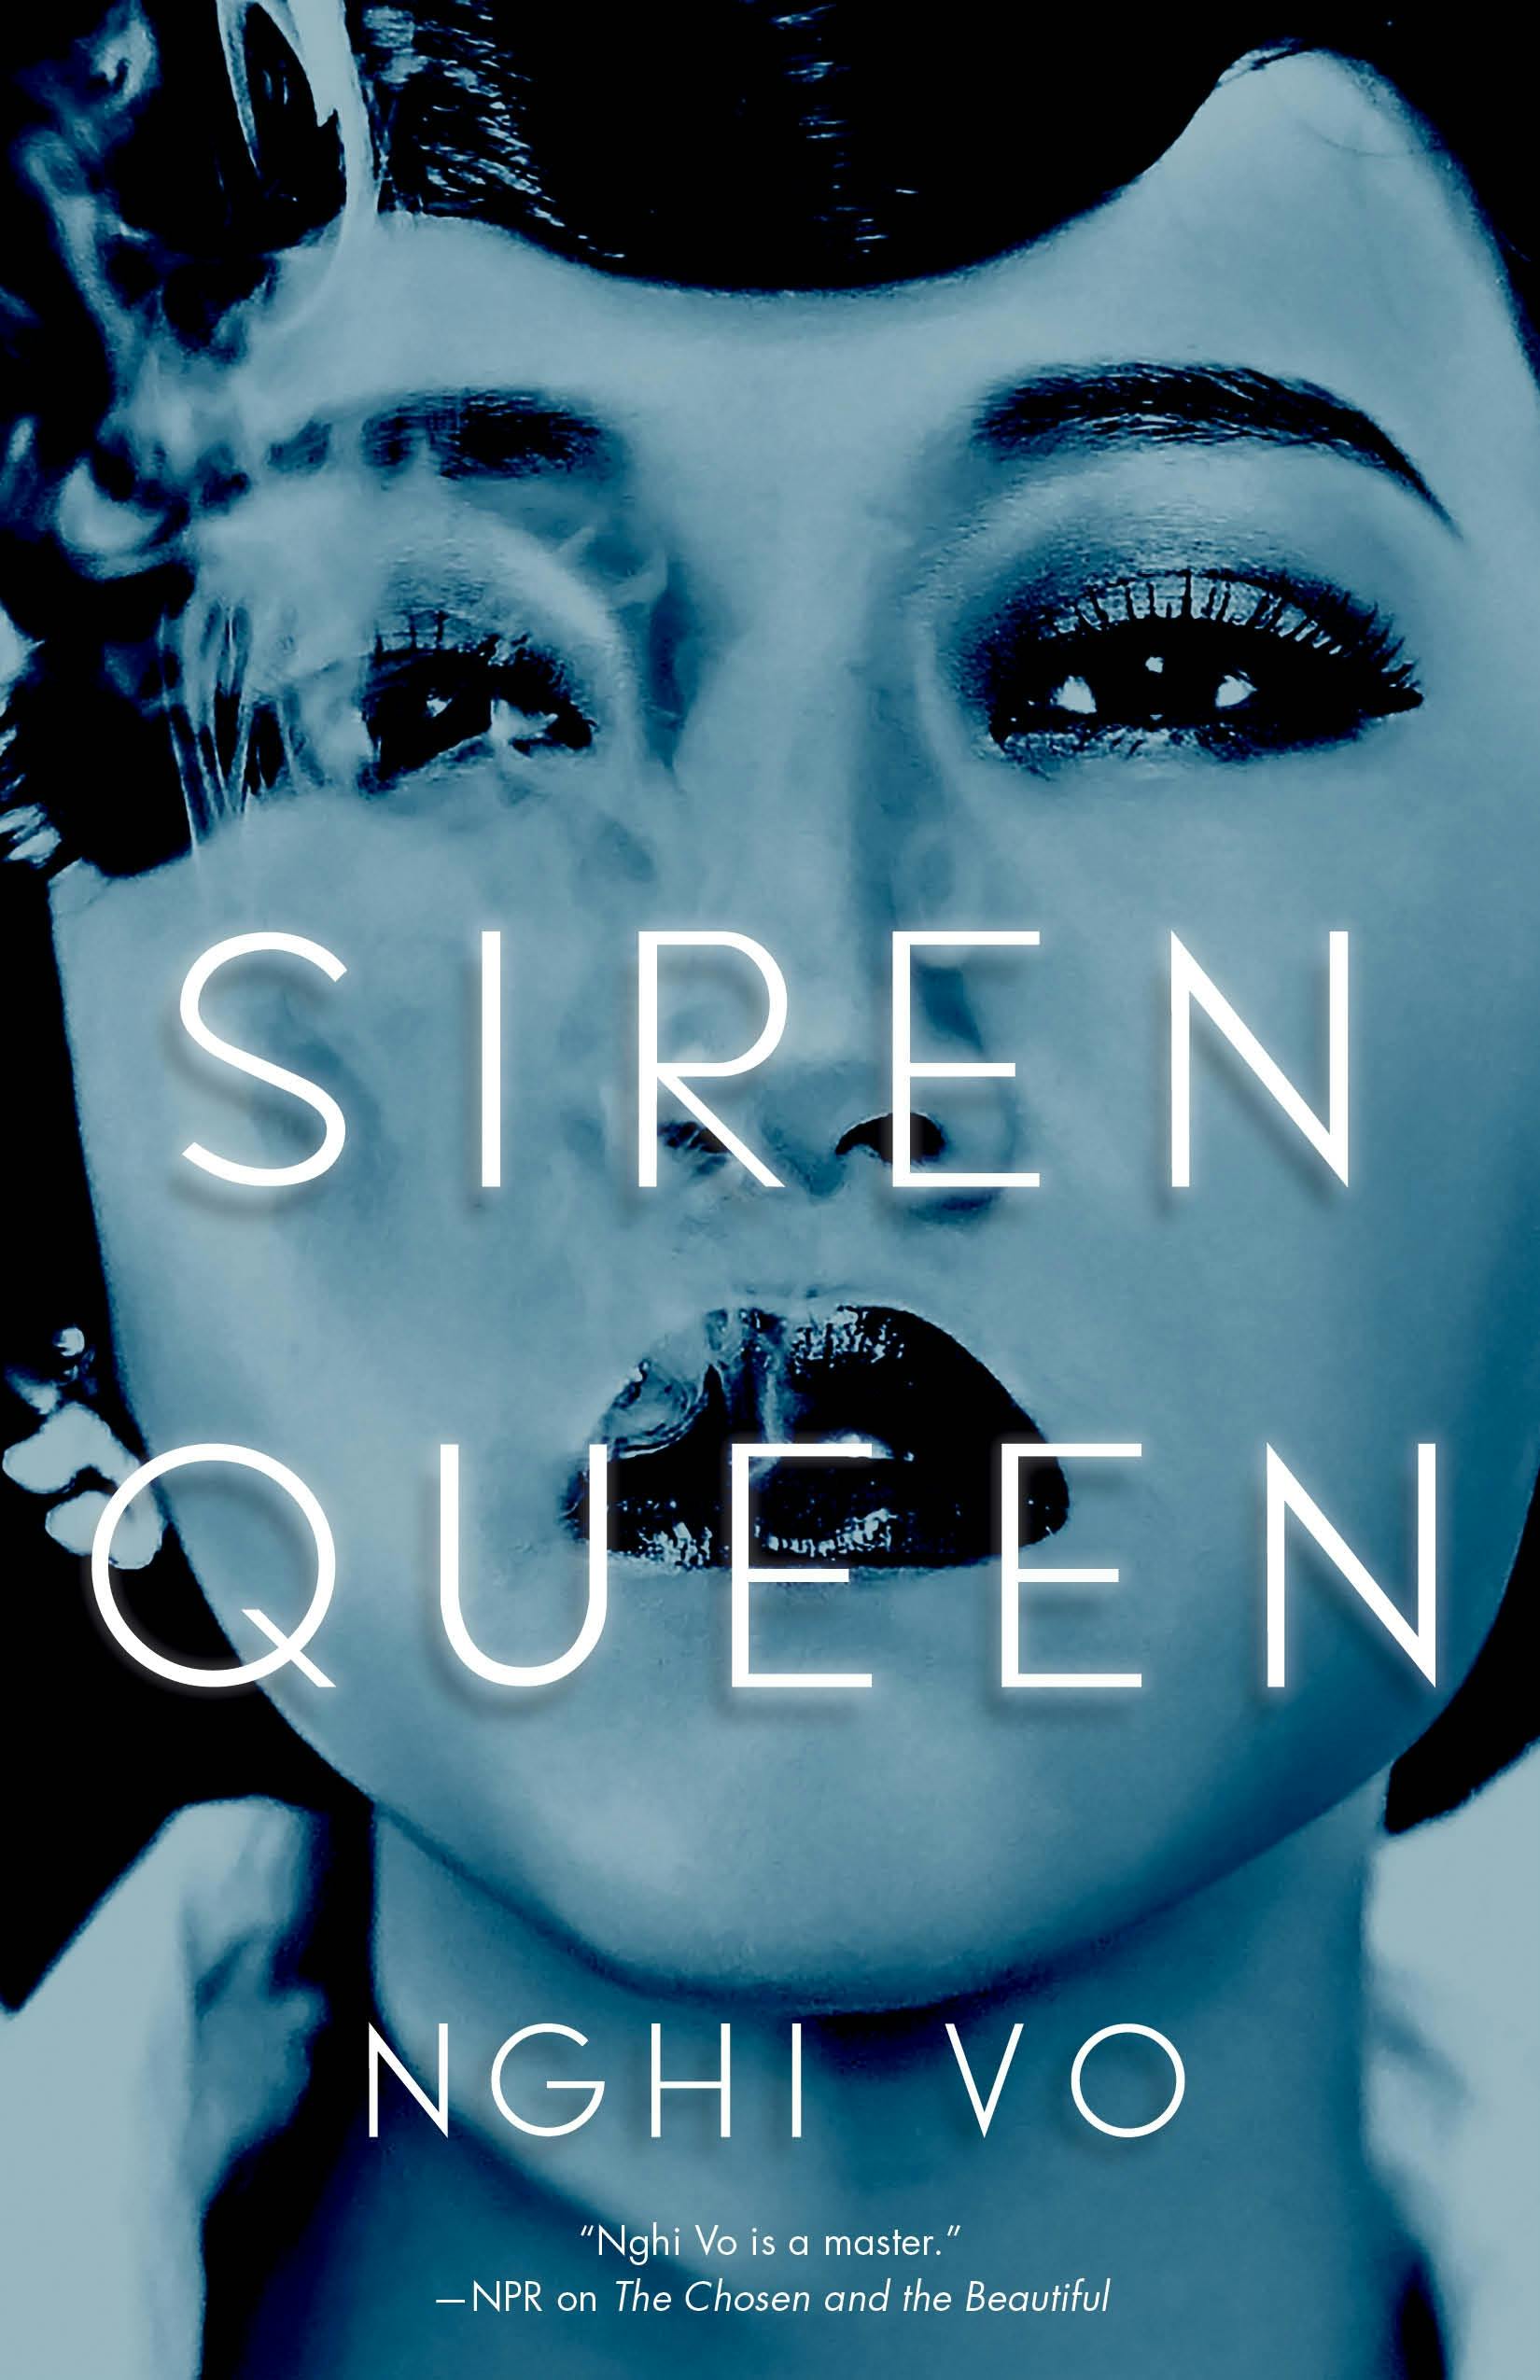 Cover for the book titled as: Siren Queen